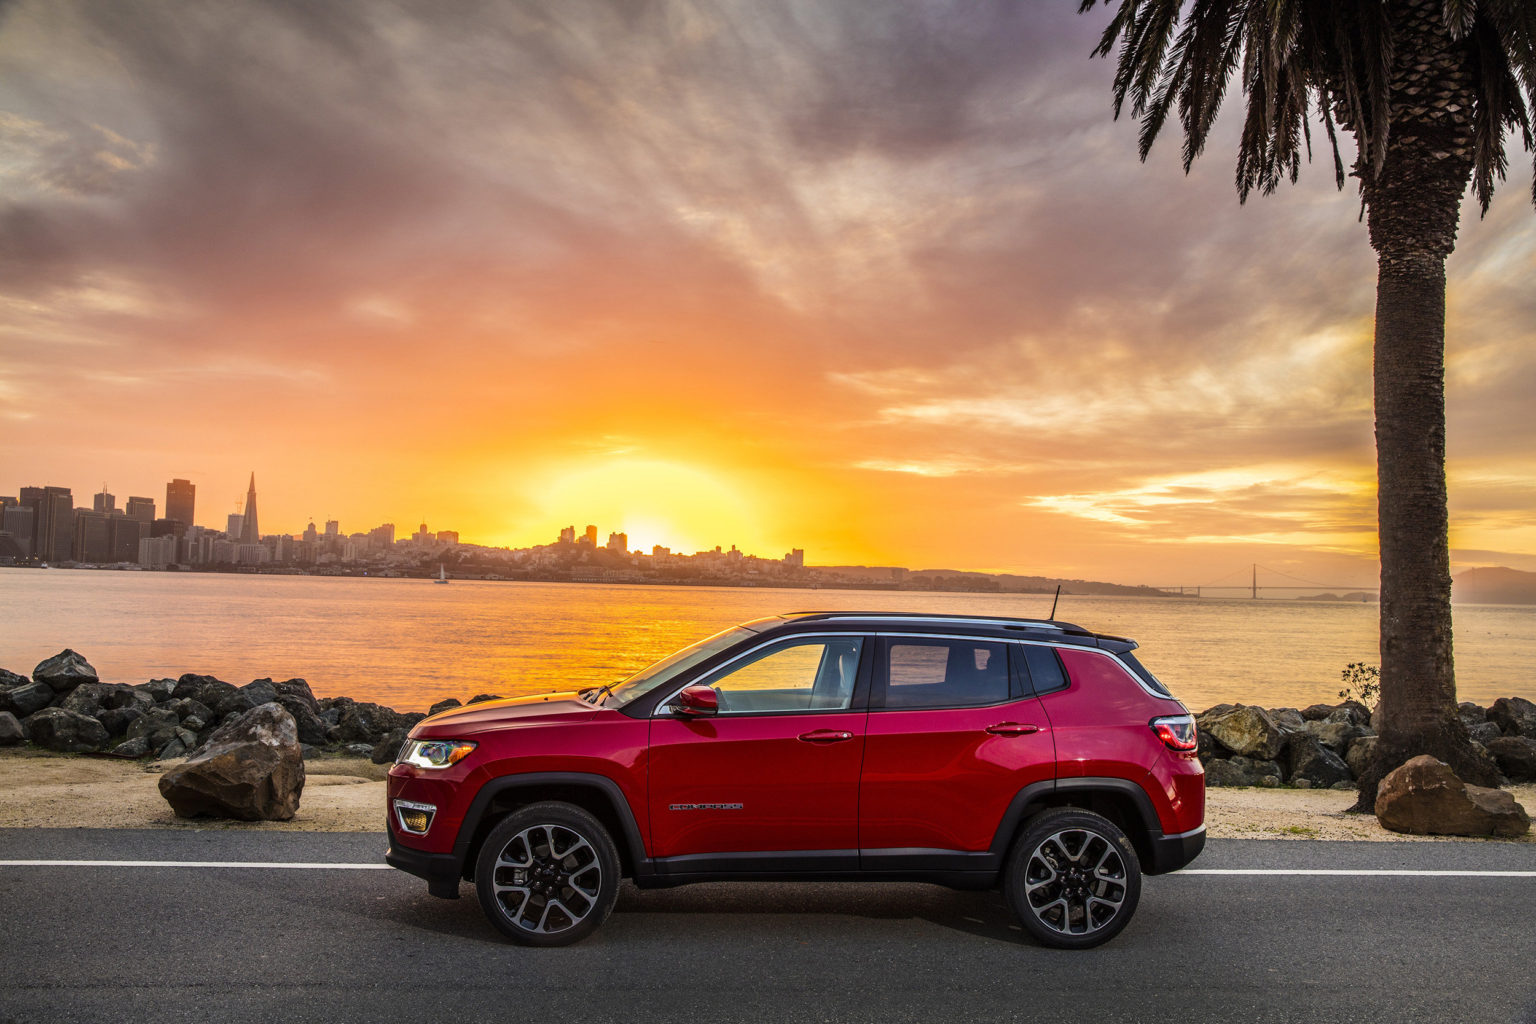 The Jeep Compass is a capable and comfortable SUV.